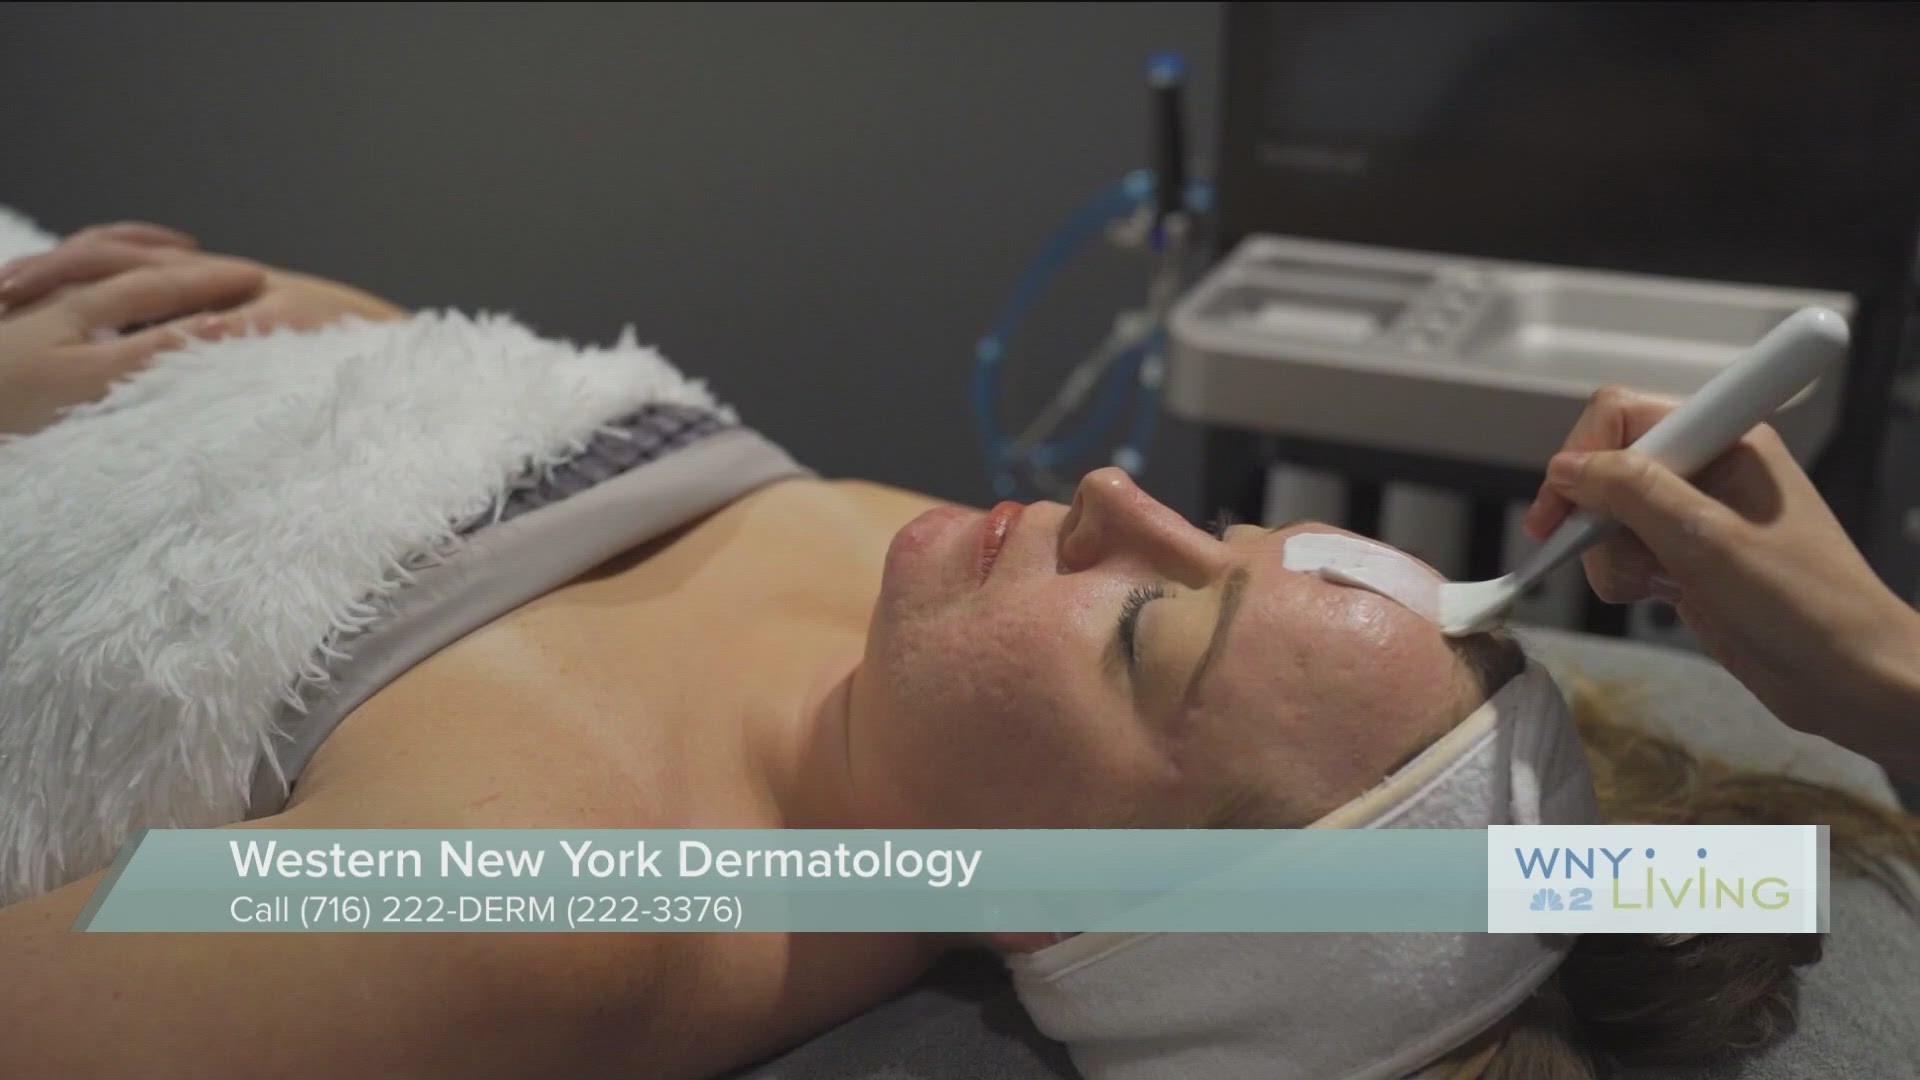 March 25th - WNY Living- WNY Dermatology (THIS VIDEO IS SPONSORED BY WNY DERMATOLOGY)